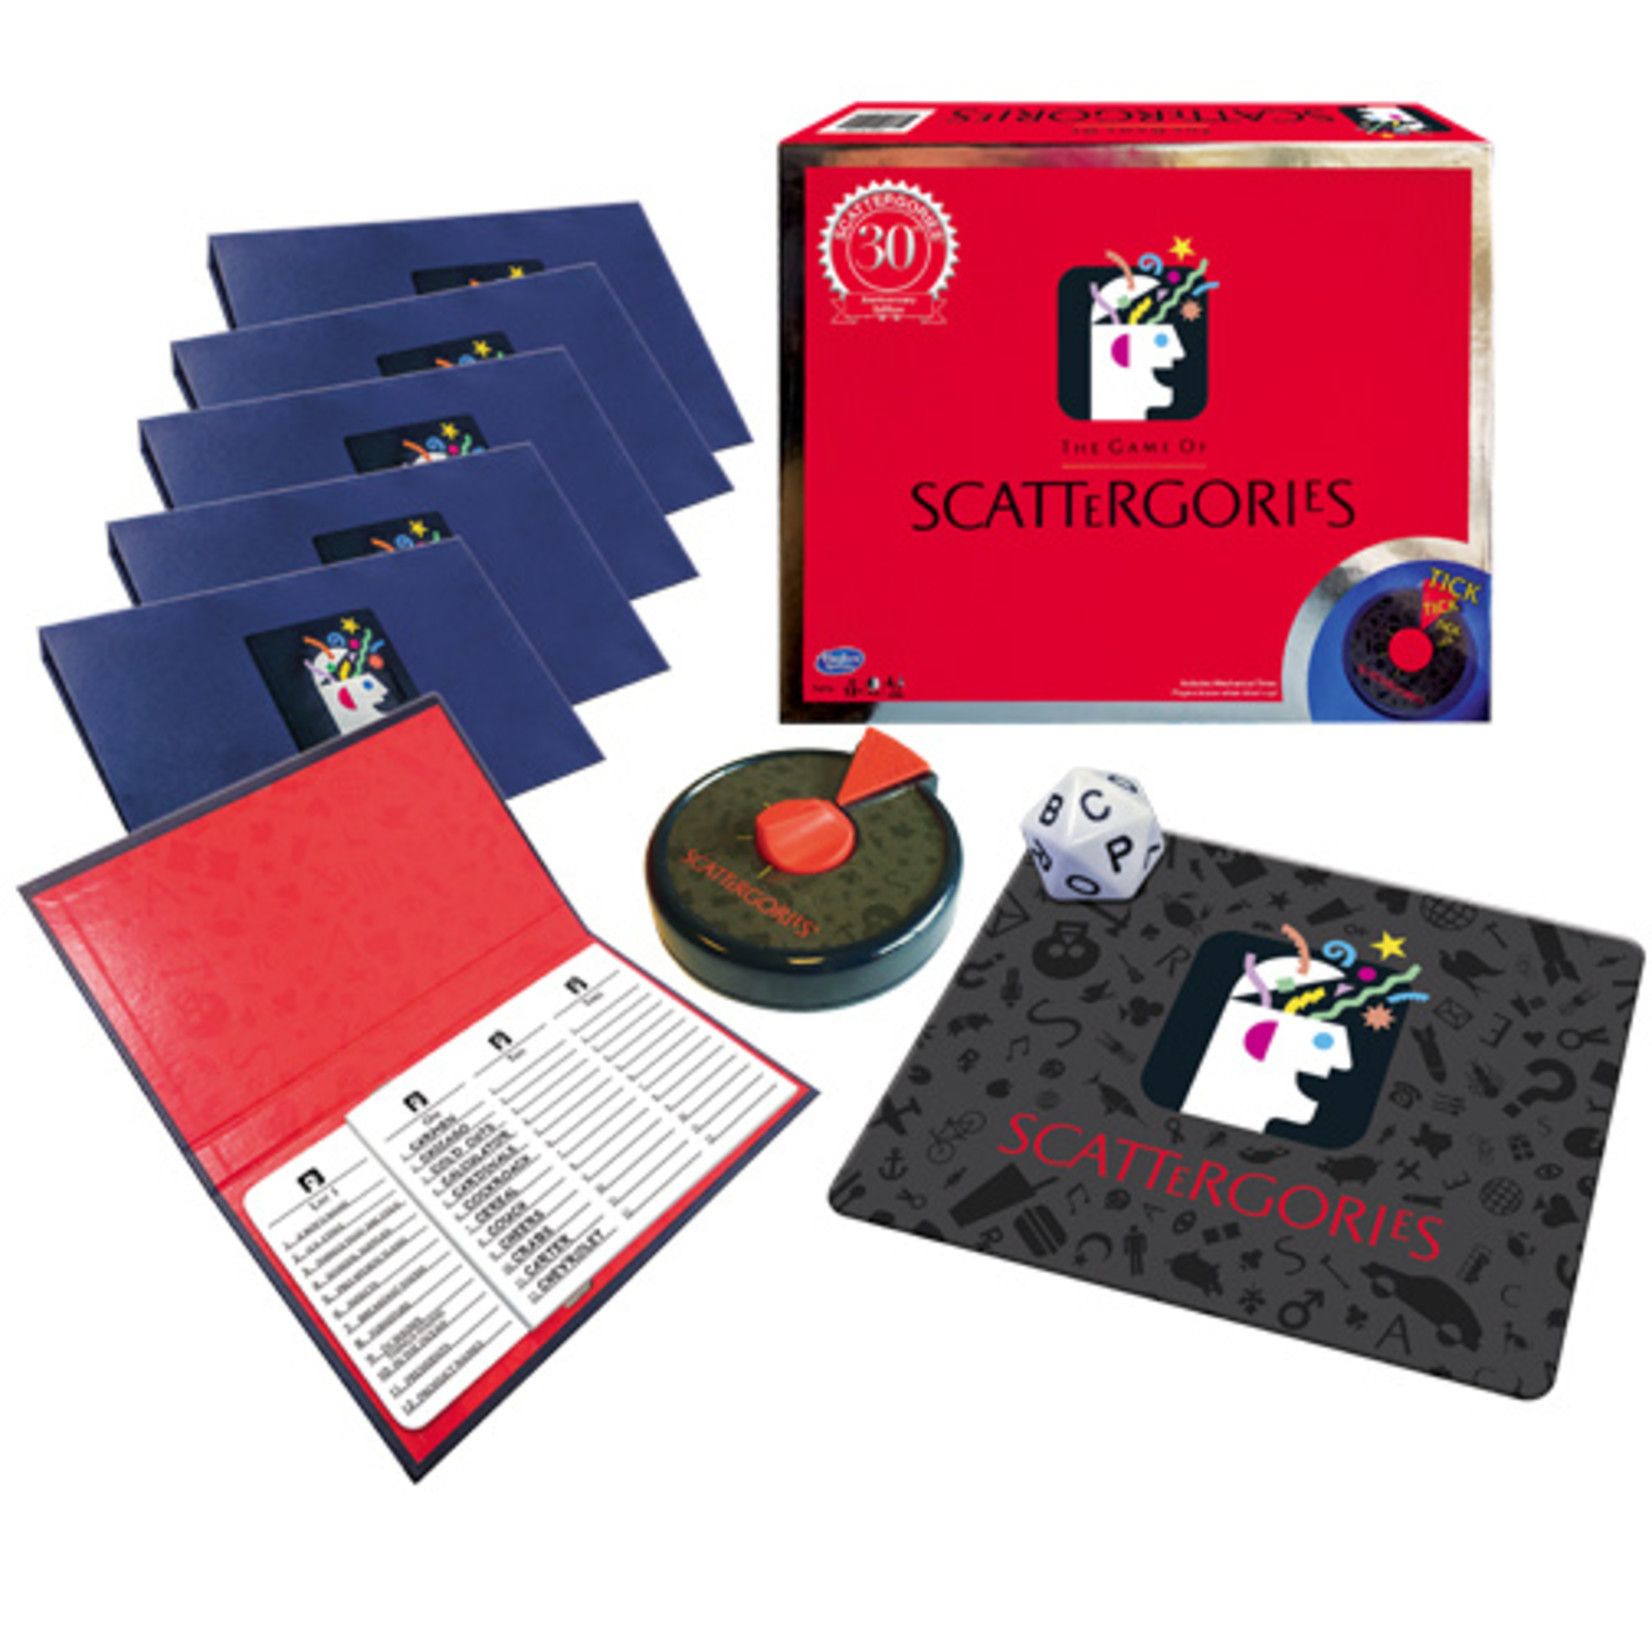 Winning Moves Scattegories - 30th Anniversary Edition